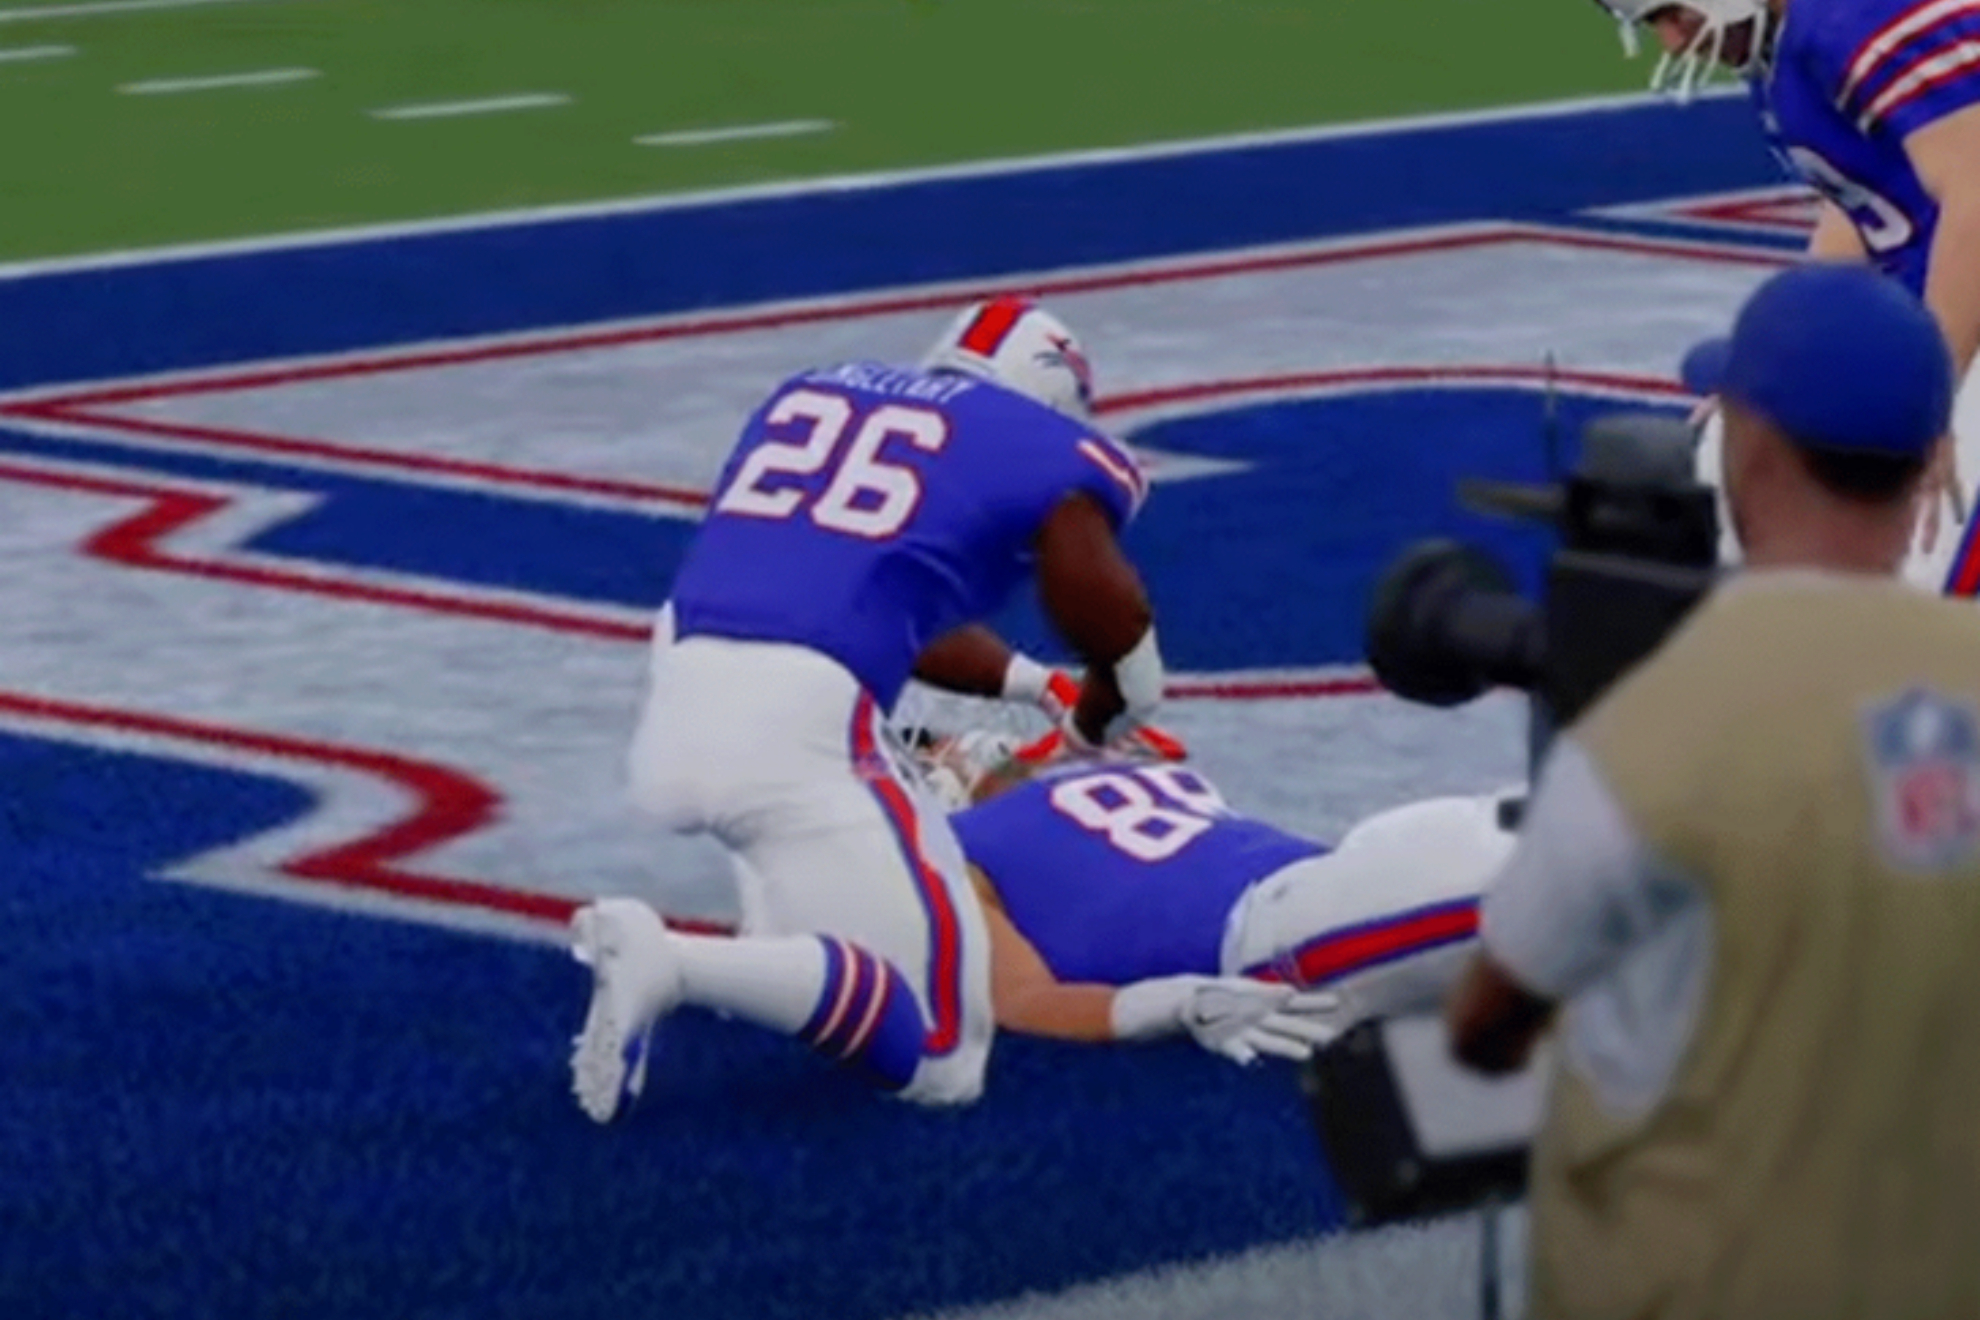 EA Sports is removing the CPR celebration in an update to their Madden NFL 23 video game.